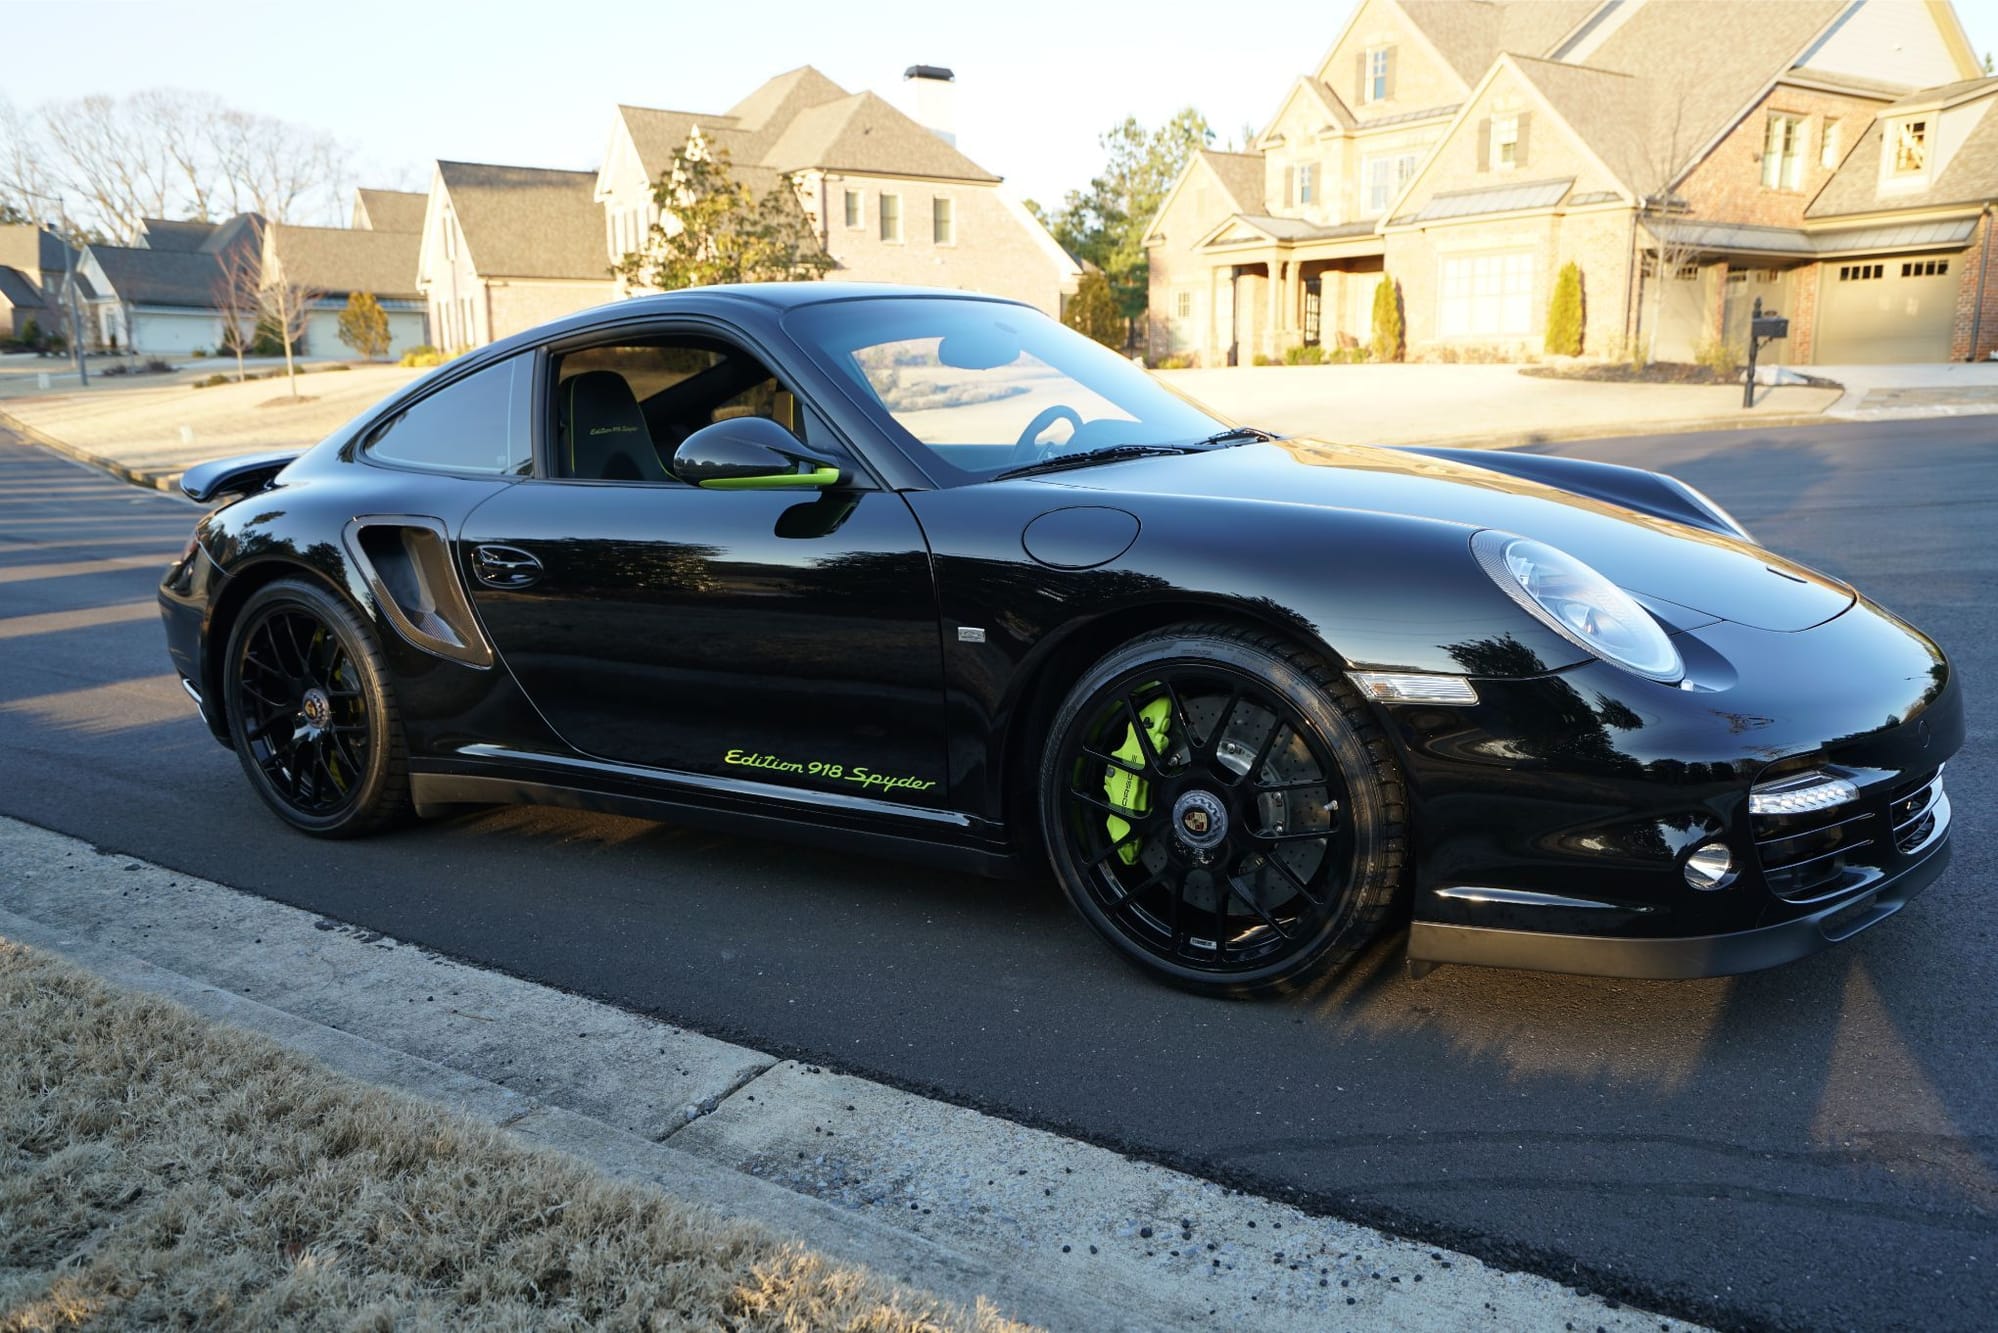 2012 Porsche 911 - 2012 Porsche 911 Turbos S Coupe 918 Spyder Edition - Used - VIN WP0AD2A99CS766593 - 11,625 Miles - 6 cyl - AWD - Automatic - Coupe - Black - Kennesaw, GA 30152, United States